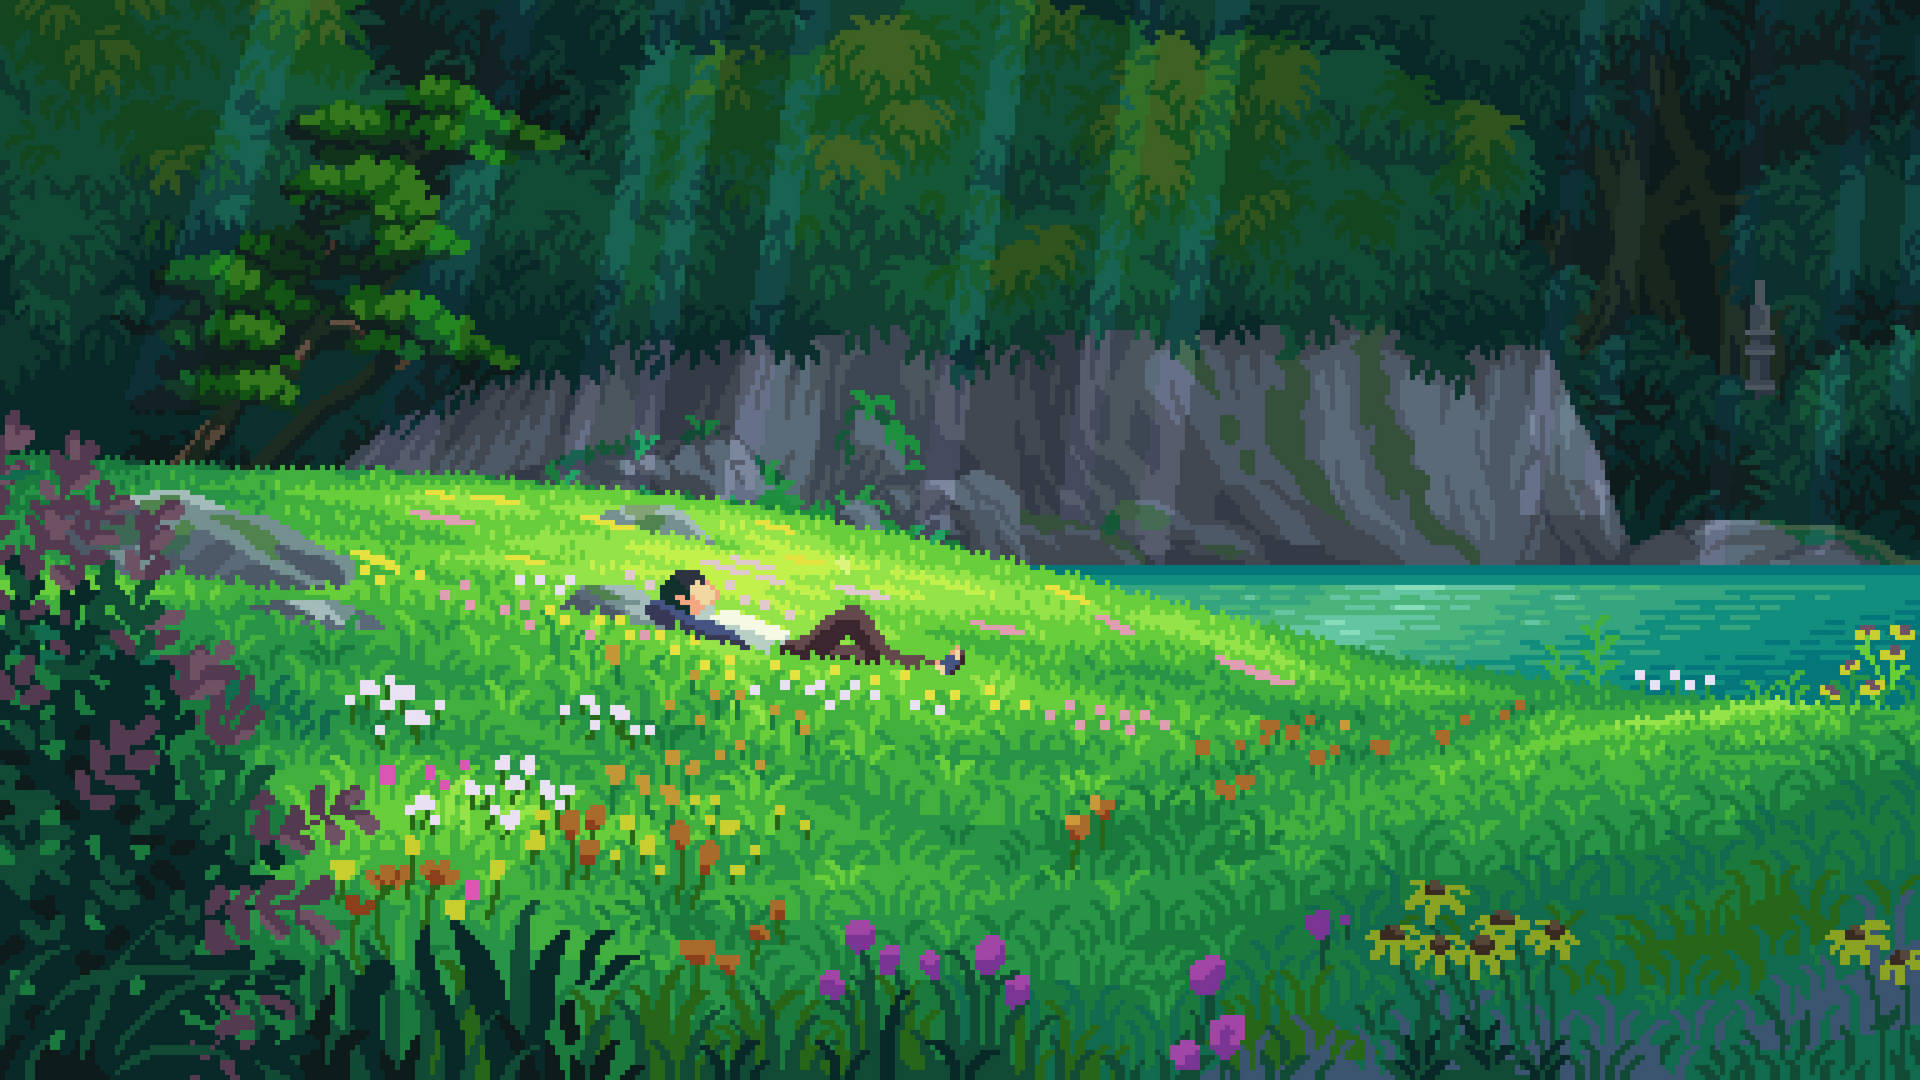 Pixel Art 3840X2160 Wallpaper and Background Image